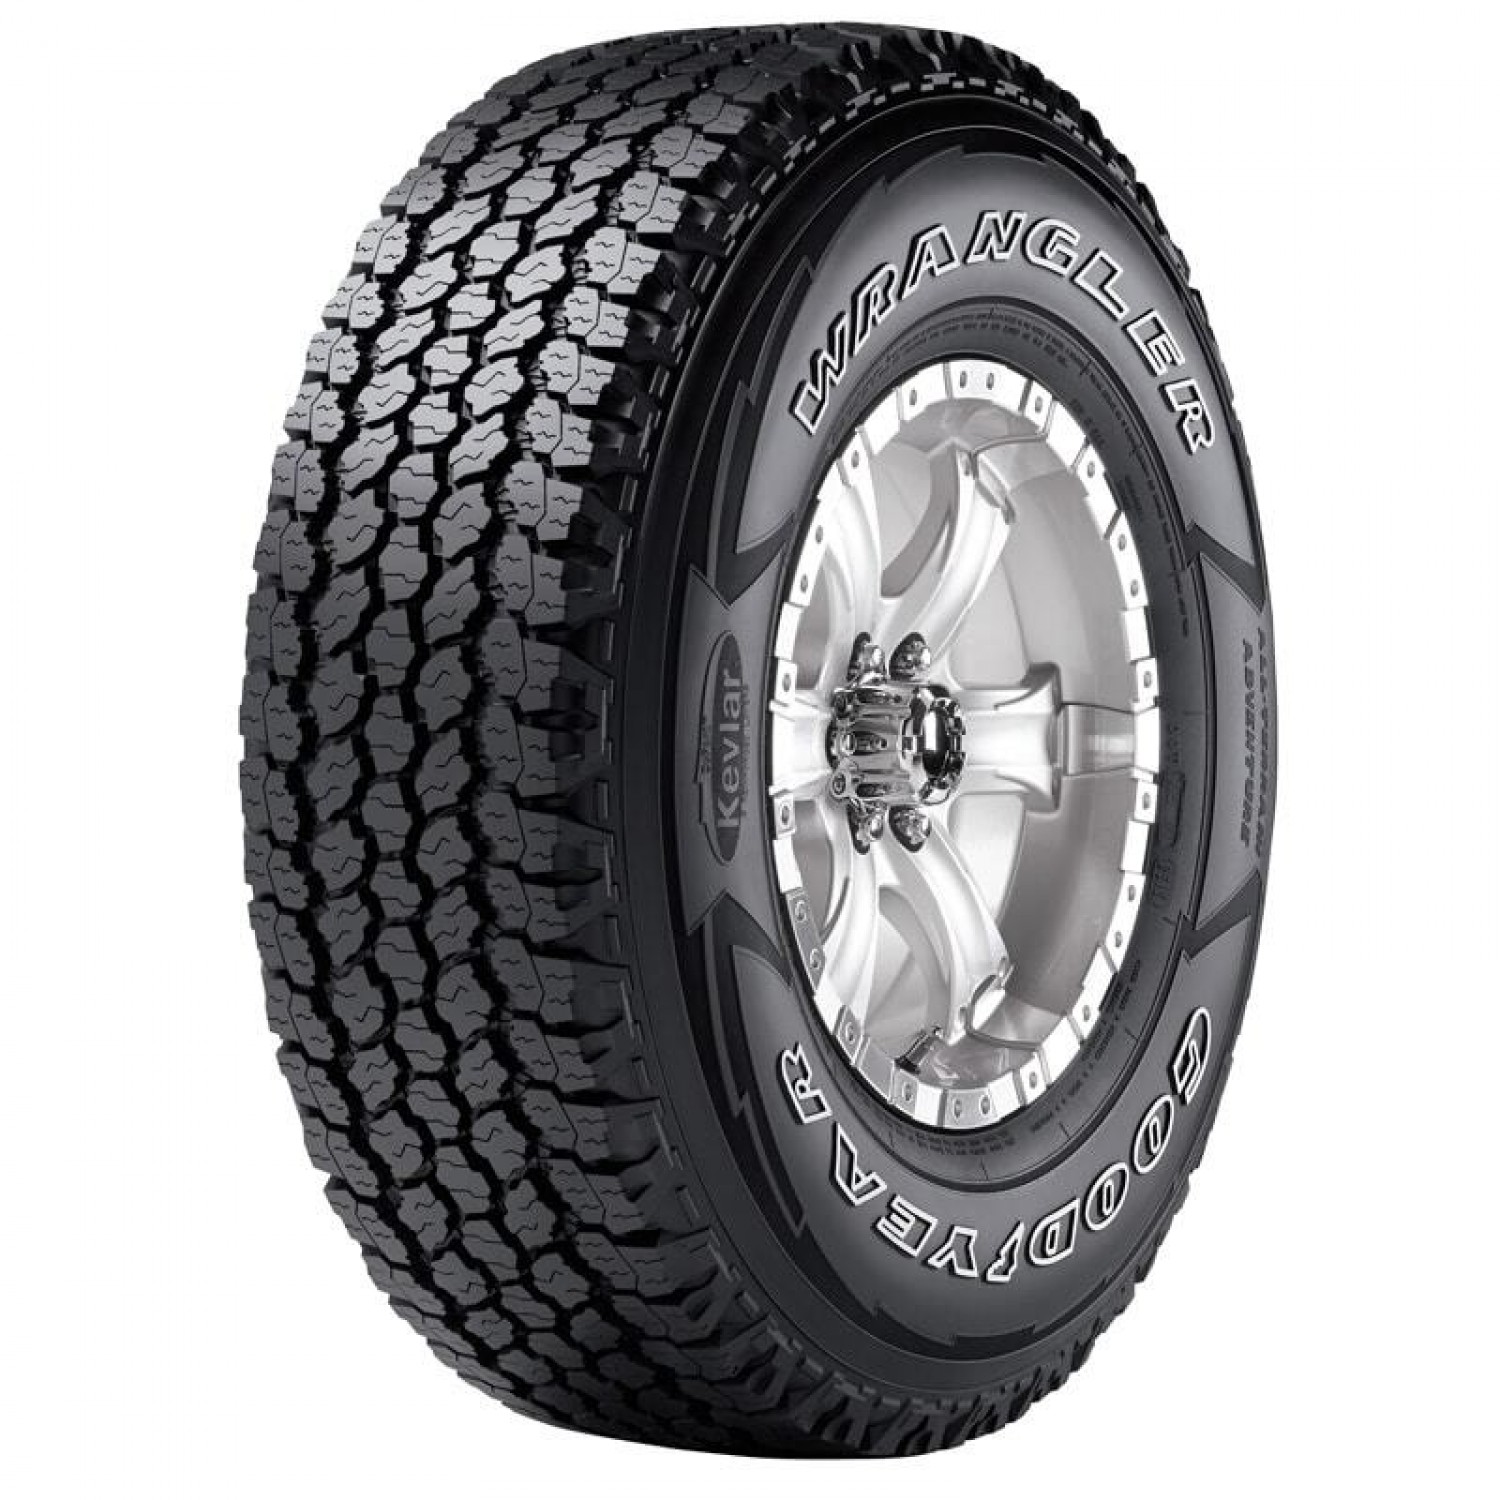 Goodyear Wrangler AT Adventure With Kevlar Outlined White Letters Tire  (245/75R16 111T) vzn121233